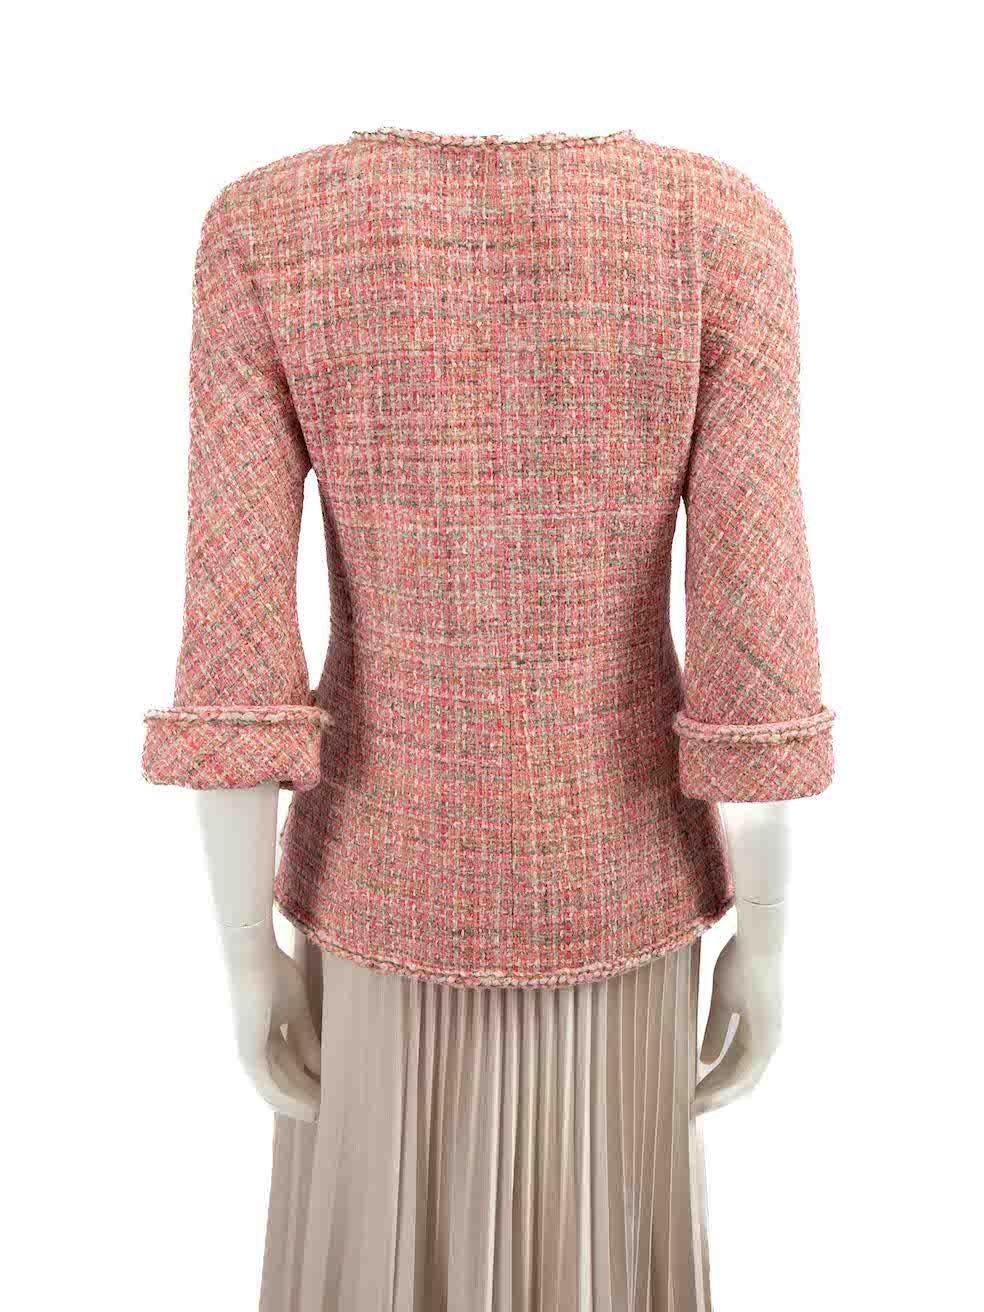 Chanel 2014 Pink Tweed Double-Breasted Jacket Size S In Good Condition For Sale In London, GB